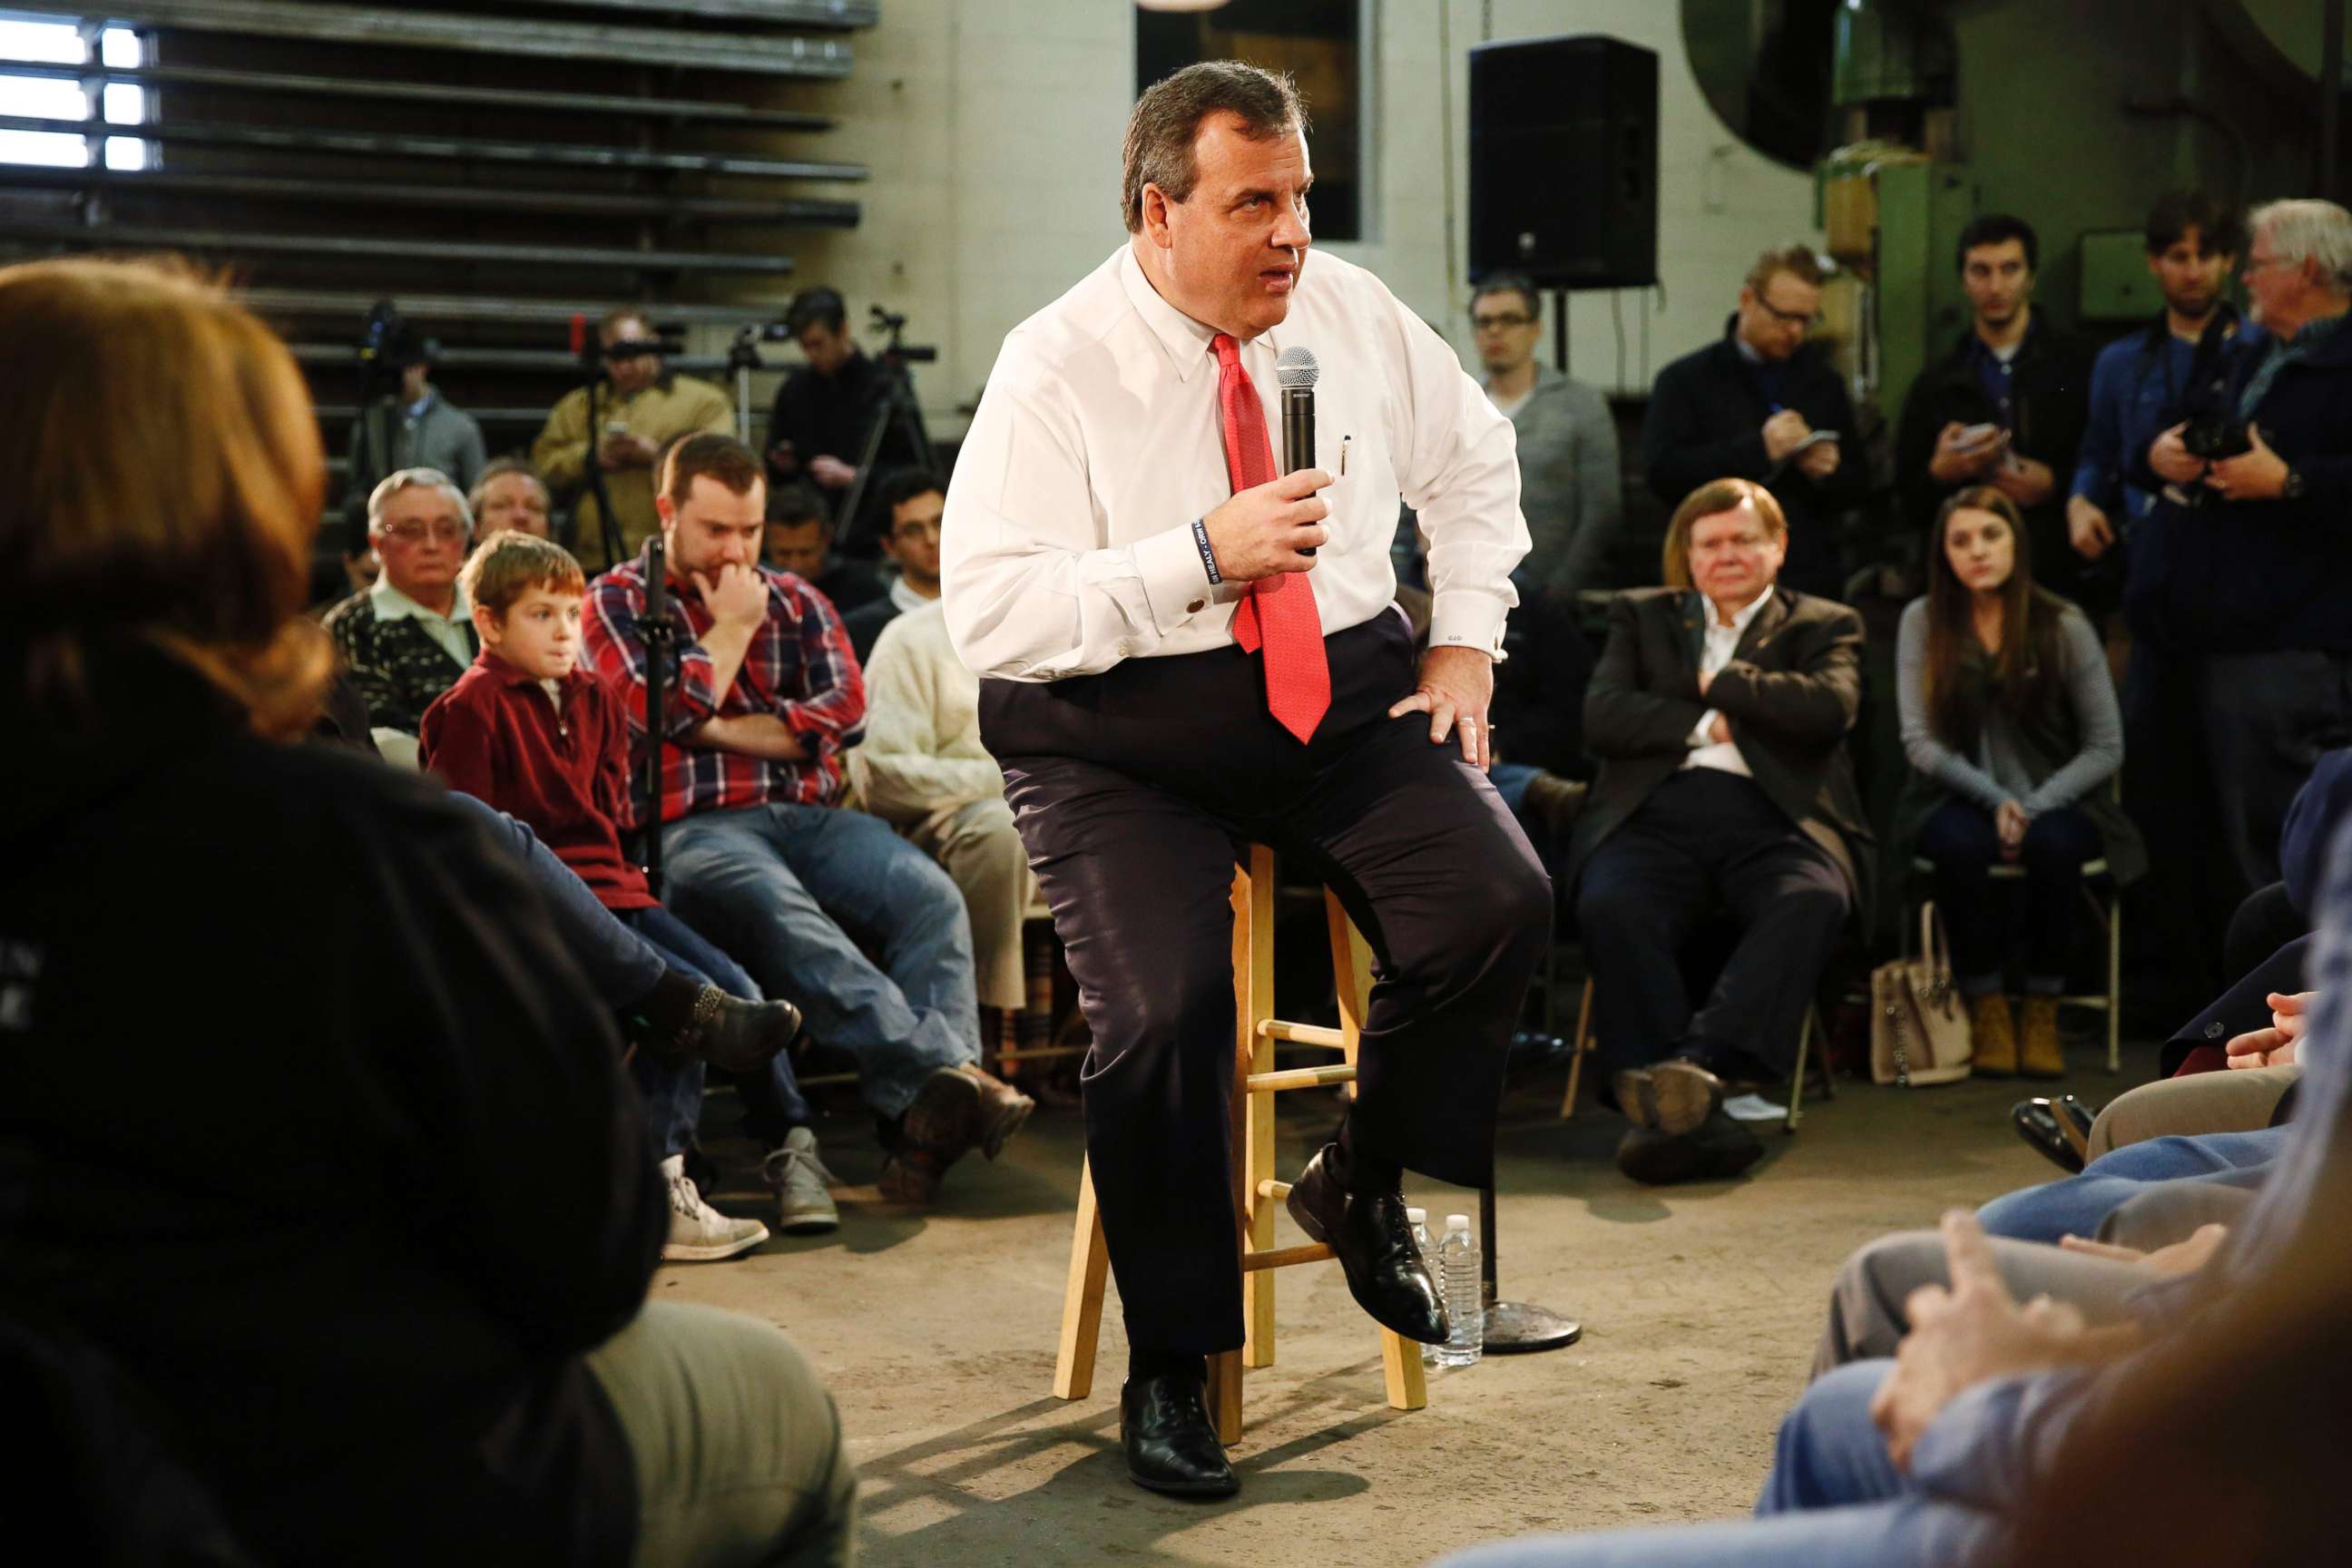 PHOTO: New Jersey Governor and Republican presidential candidate Chris Christie speaks at a town hall event at a metal fabrication company, Feb. 8, 2016, in Hudson, N.H. 